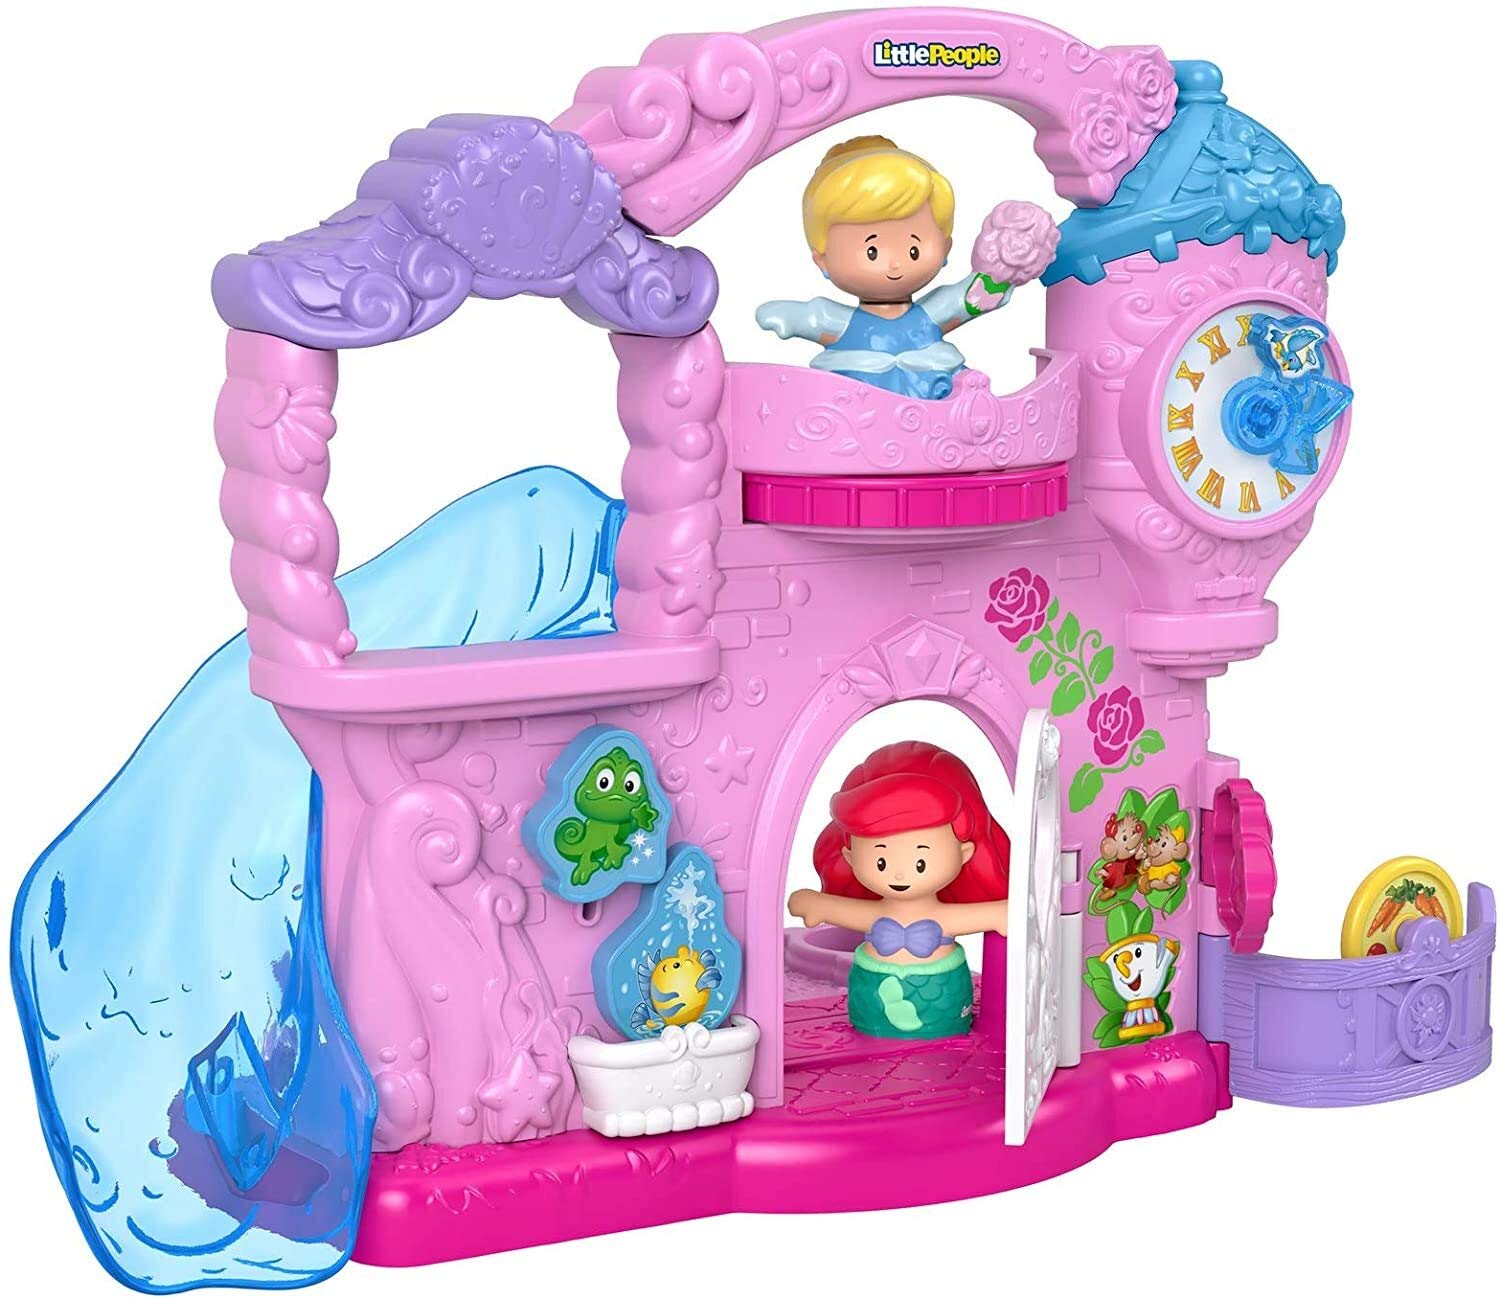 Fisher-Price Little People – Disney Princess Play & Go Castle, portable playset with character figures for toddlers and preschool kids